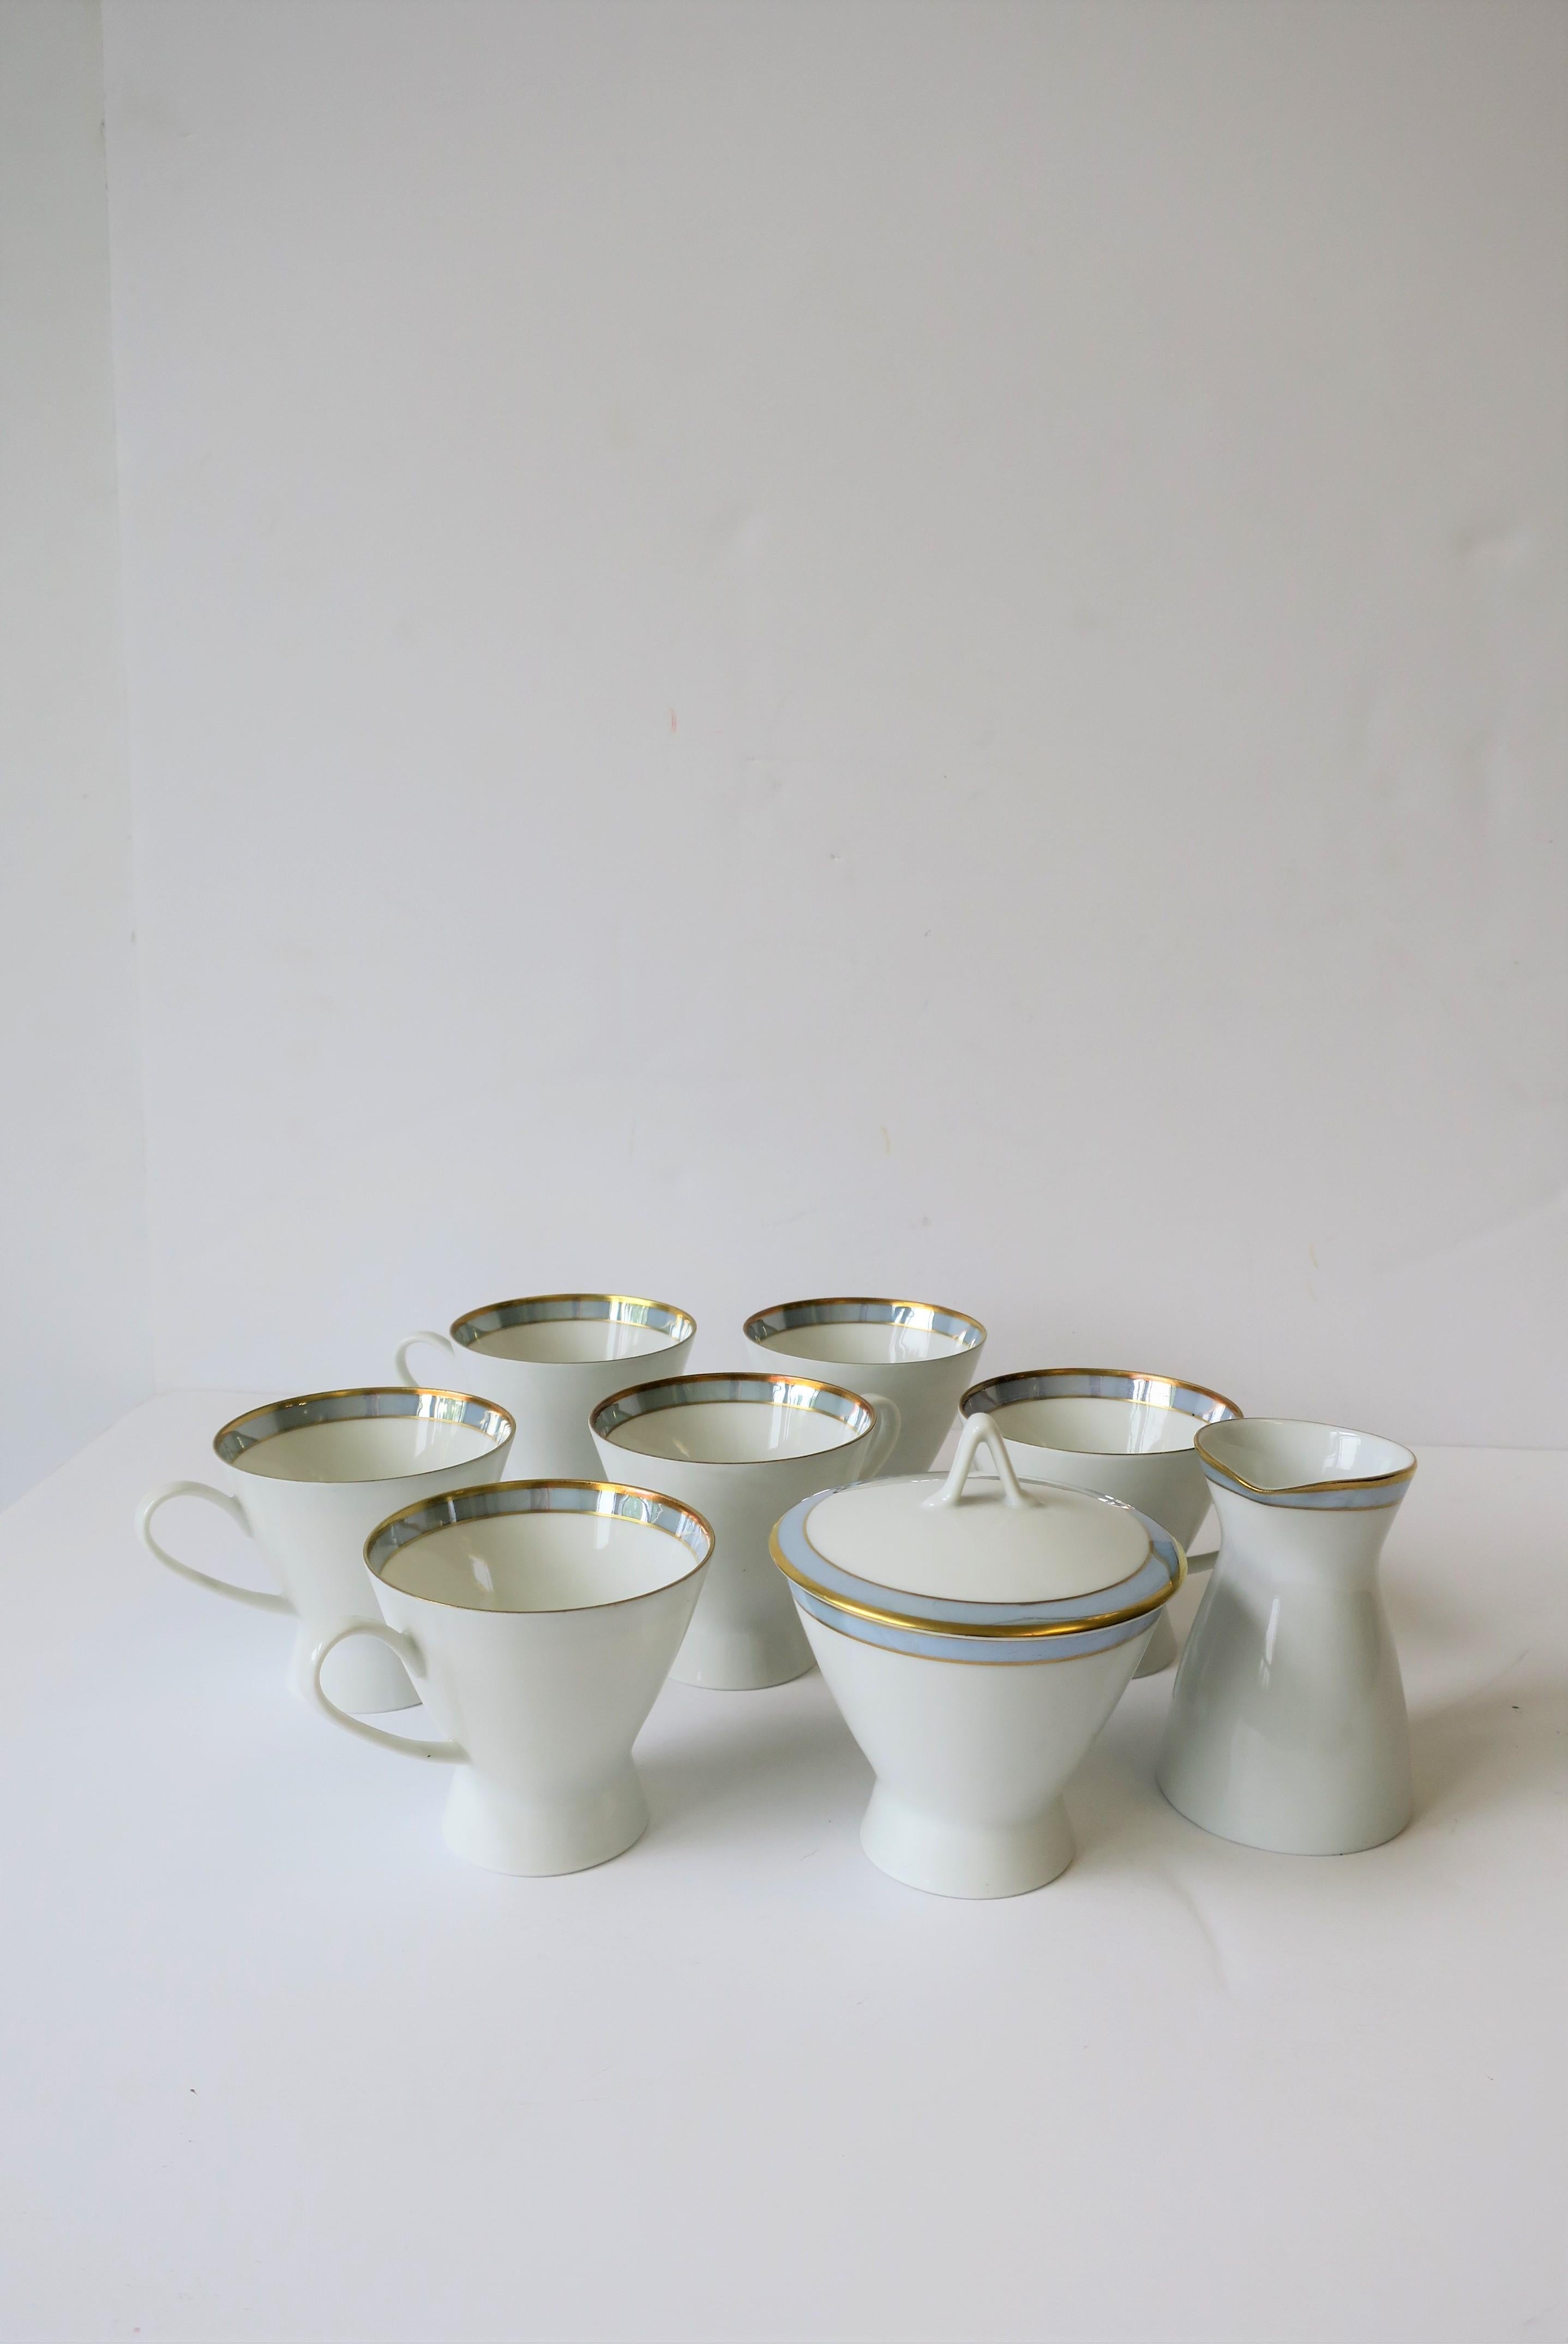 Midcentury Modern German Blue & White Porcelain Coffee or Tea Set by Rosenthal   For Sale 2